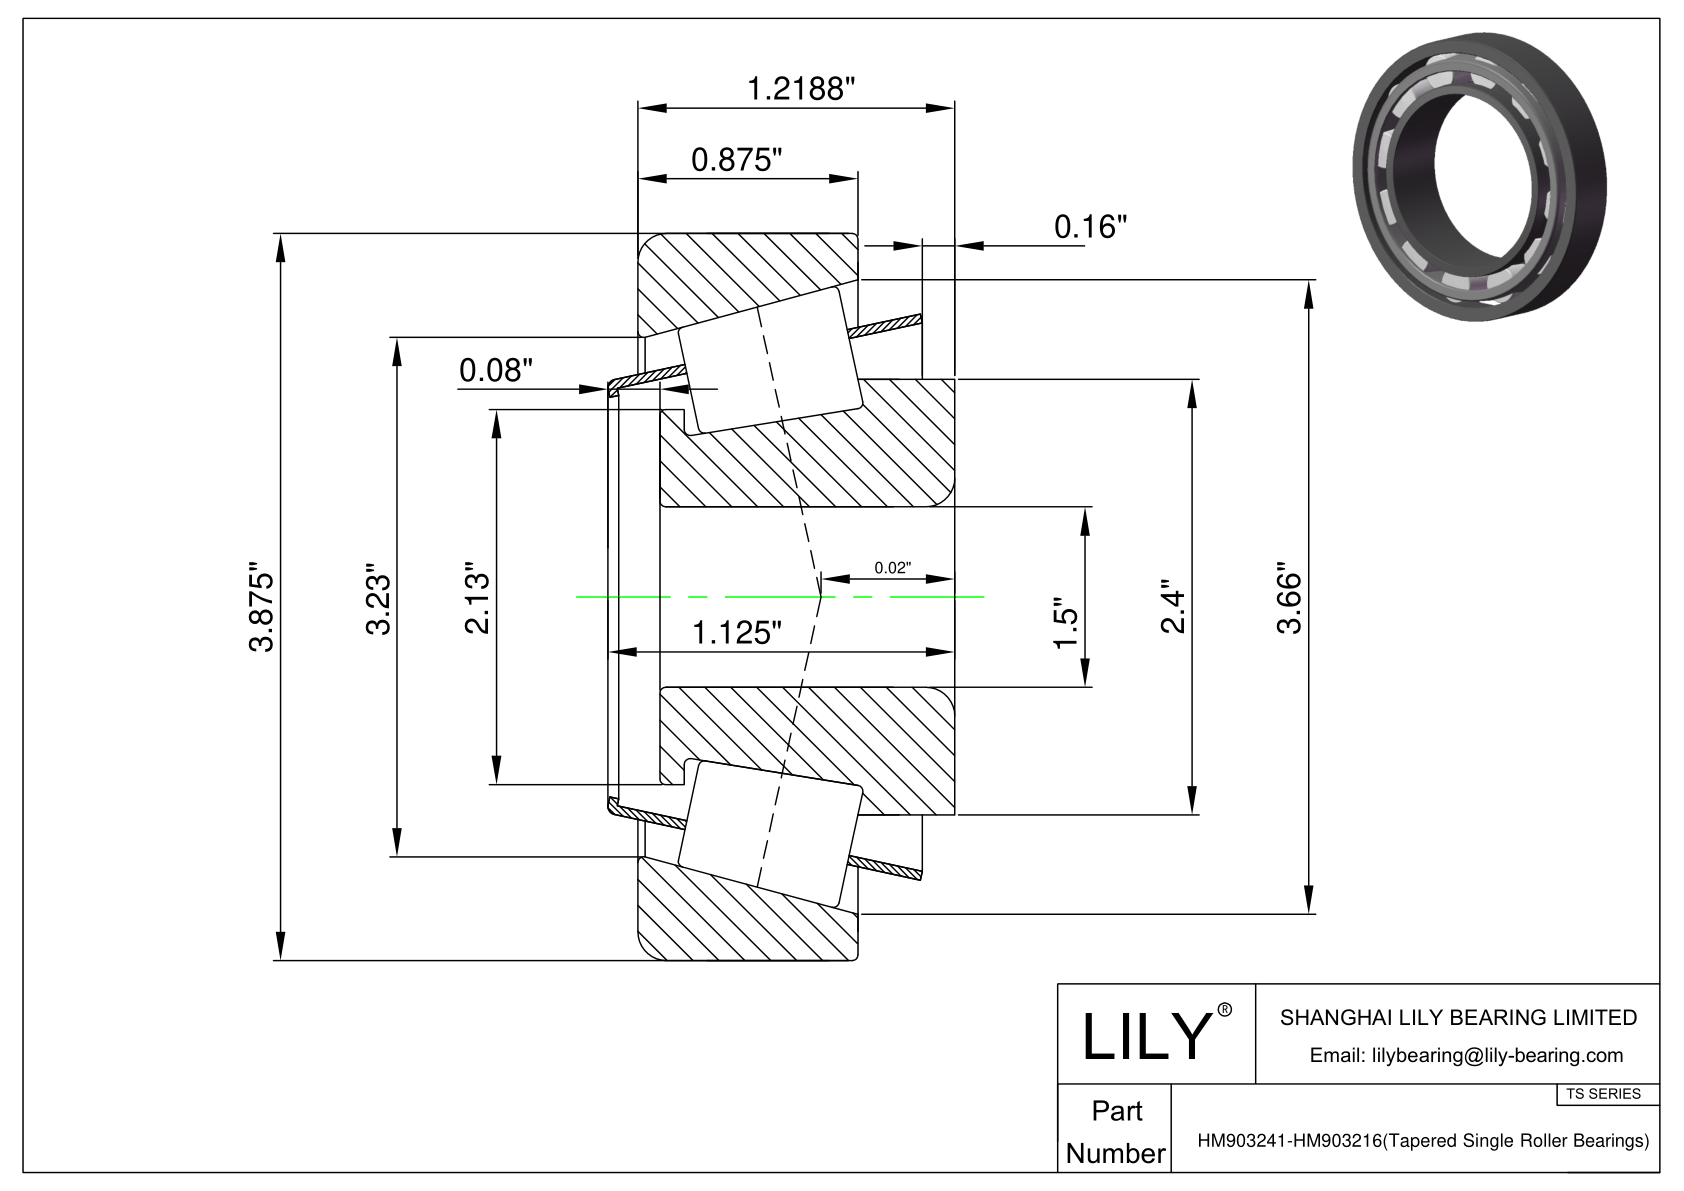 HM903241-HM903216 TS (Tapered Single Roller Bearings) (Imperial) cad drawing